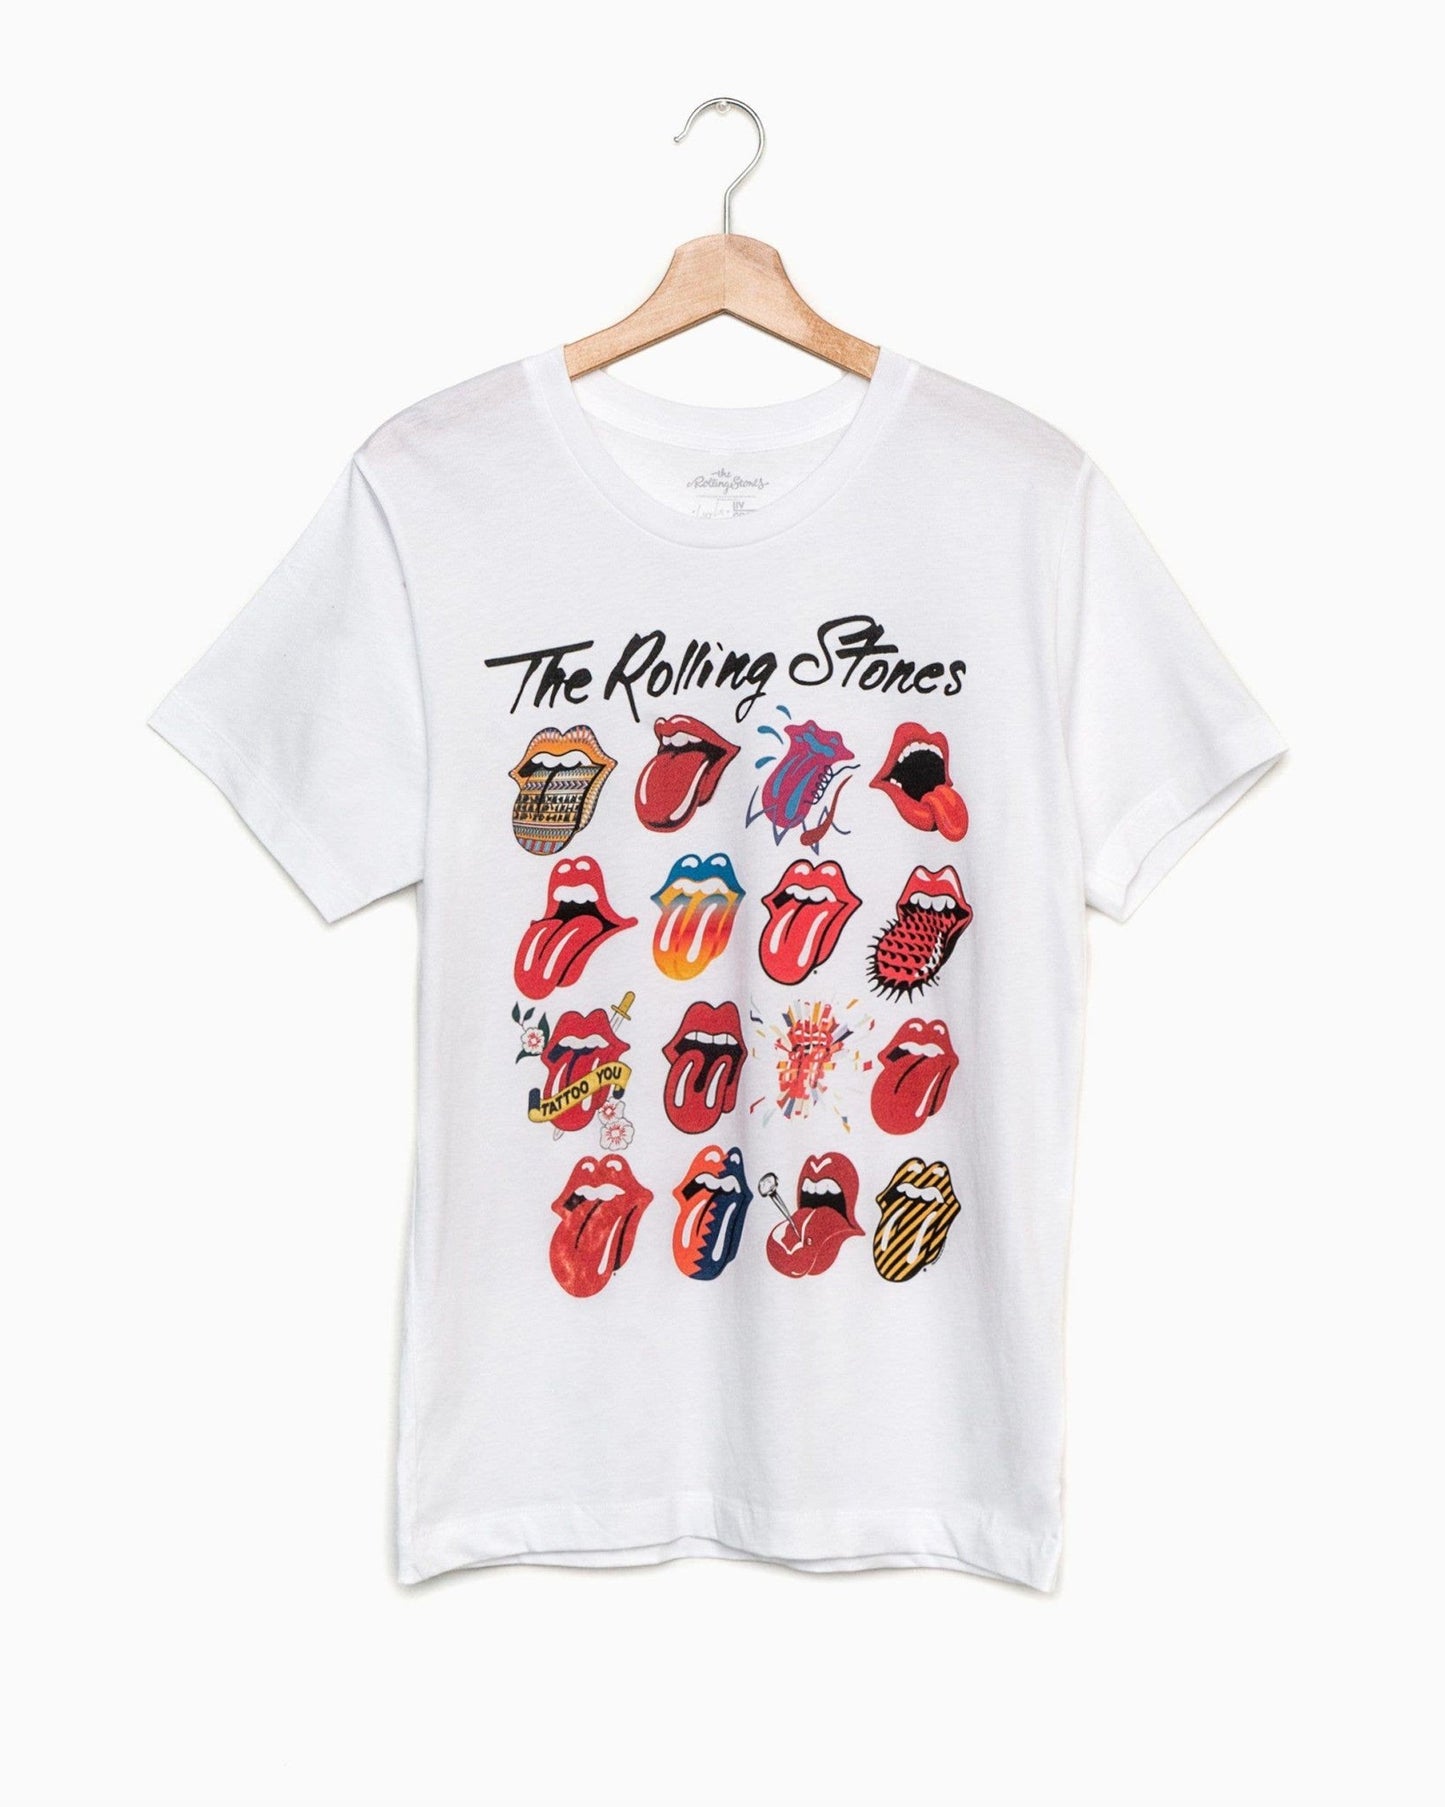 Rolling Stones Licks Over Time - the friday collective